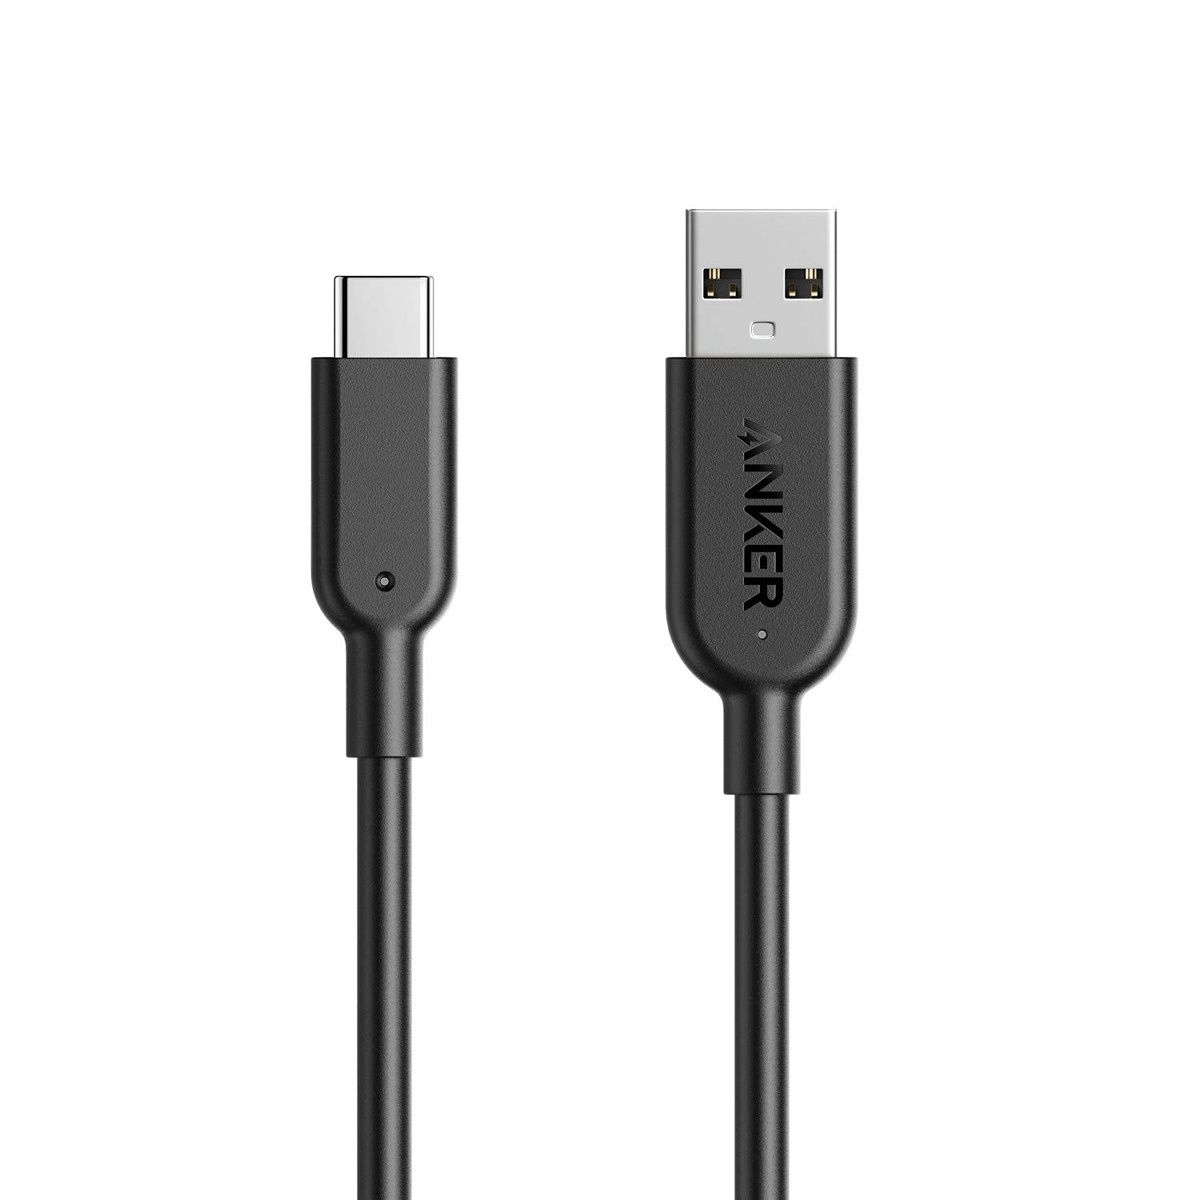 This Anker Powerline II cable is our pick for a Type-A to Type-C cable for your new Samsung foldable. It supports up to 10Gbps data transfer speeds. It's also USB-IF certified and comes with a lifetime warranty.